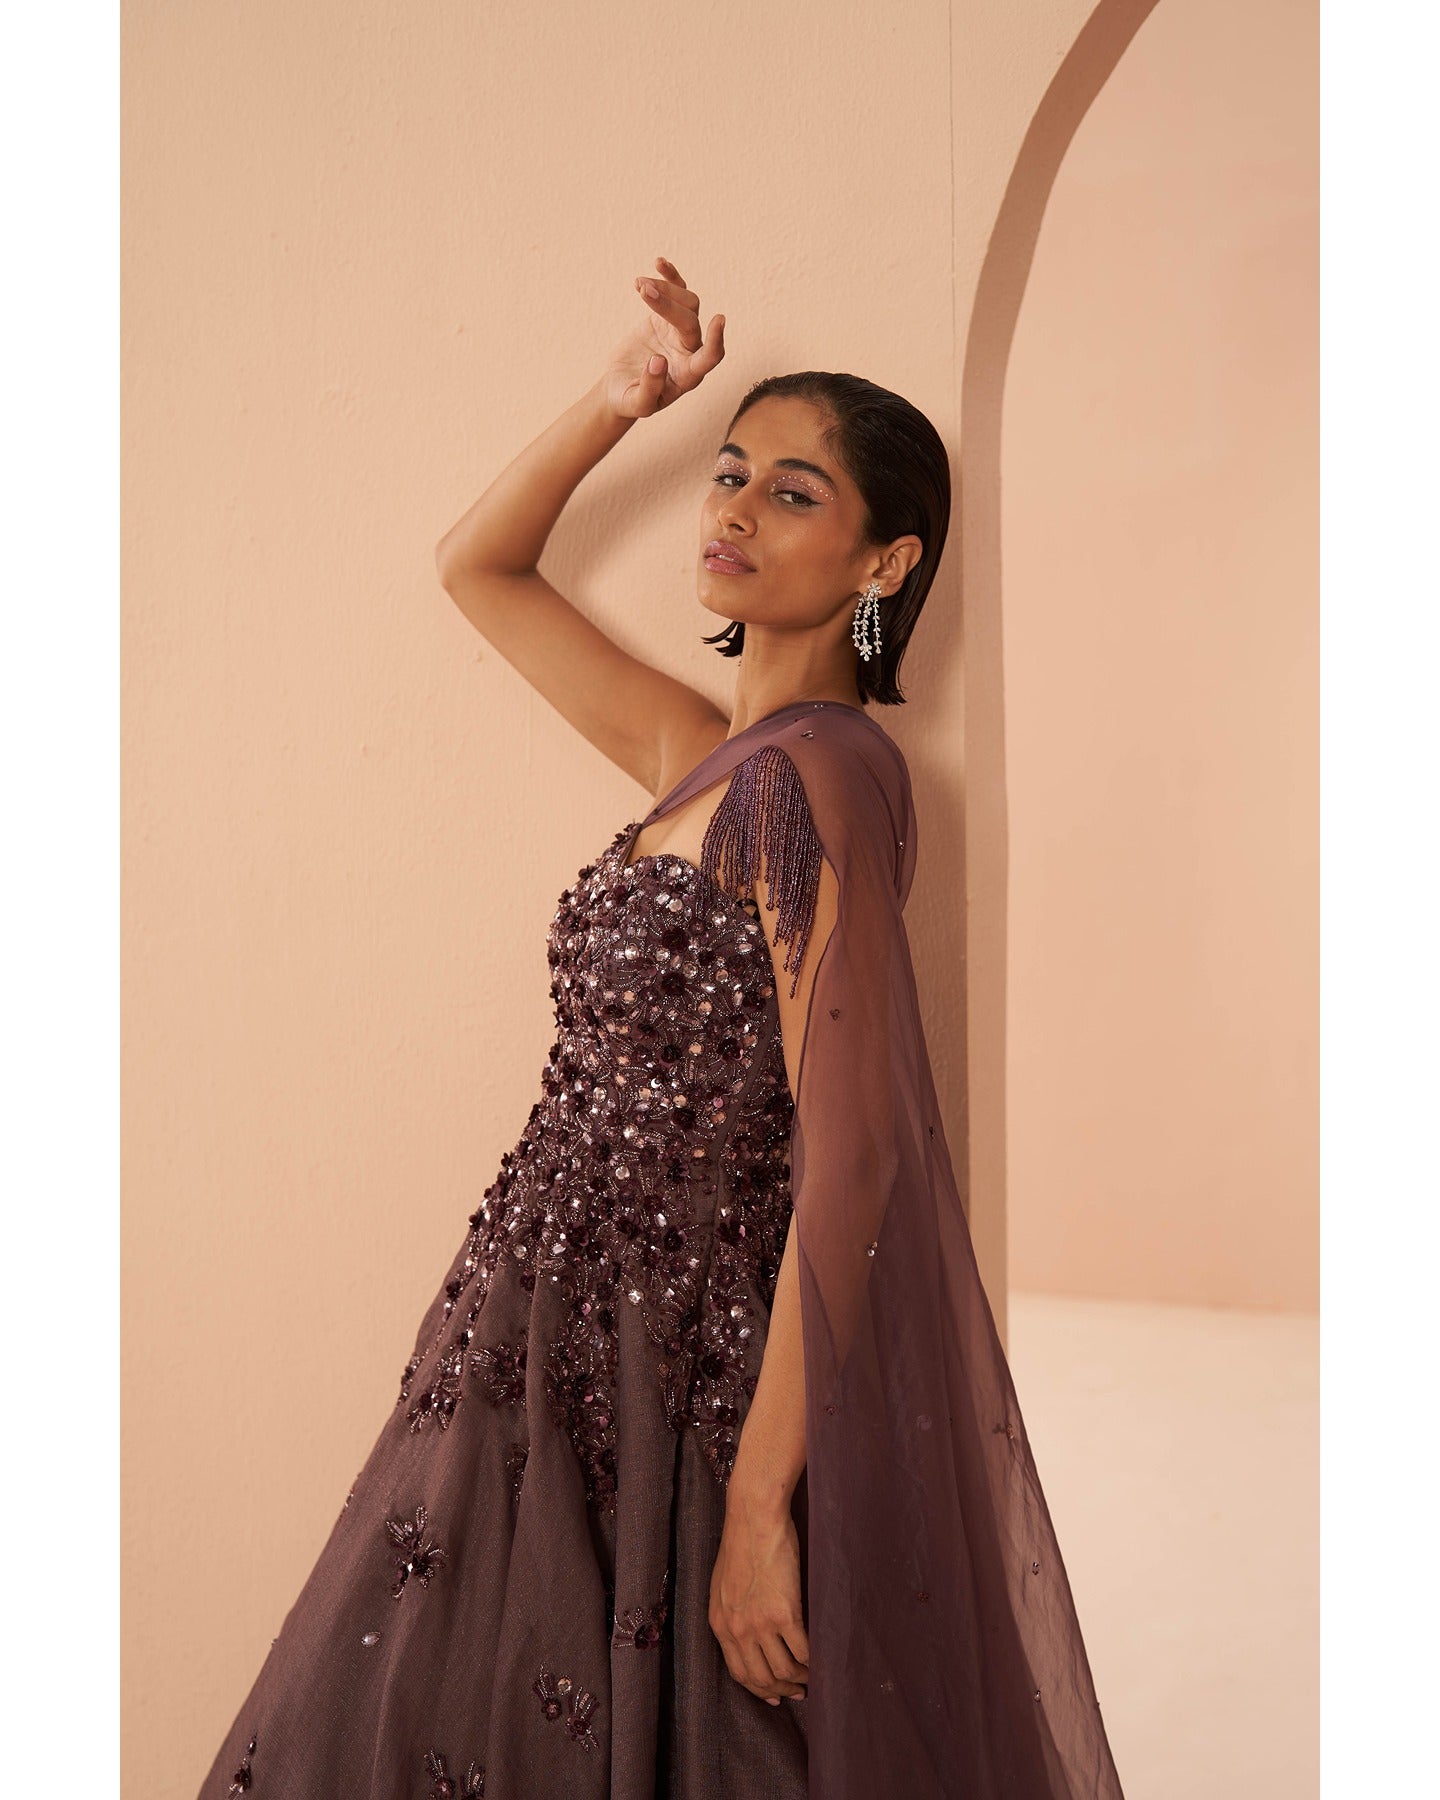 Wine Elegance: Adorned with intricate hand embroidery, this gown is a rich tapestry of sophistication and glamour.